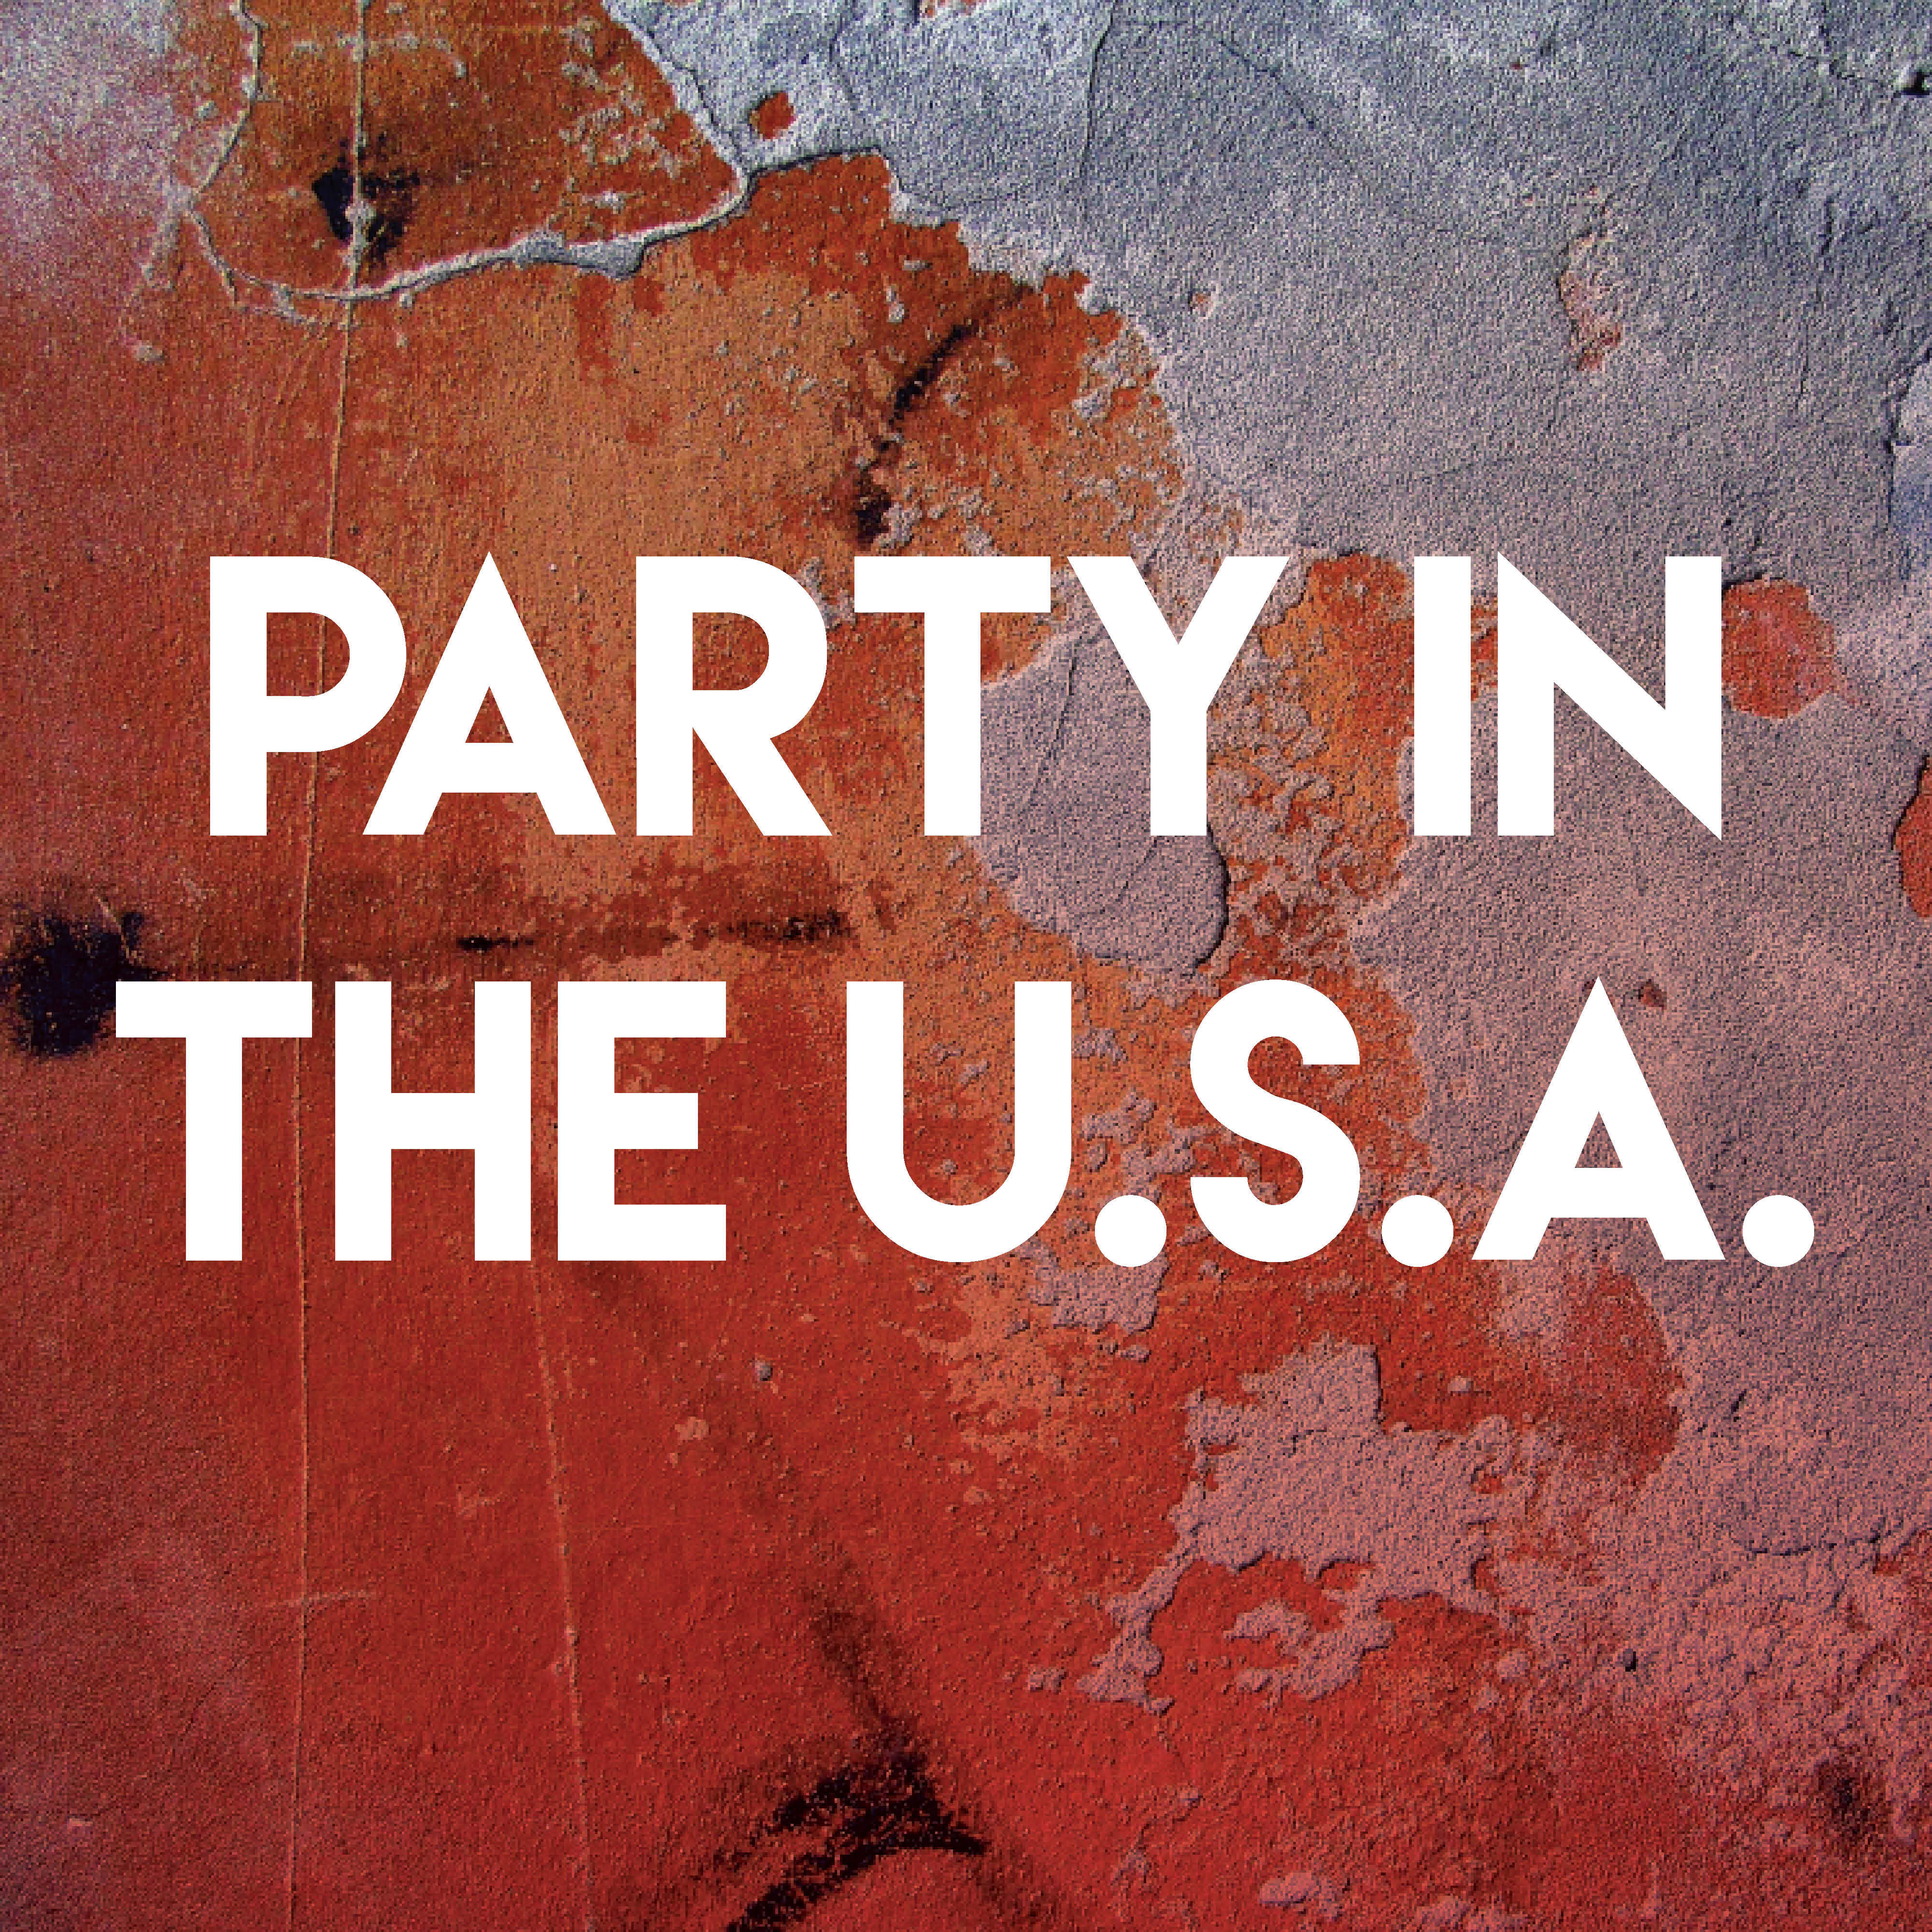 Party in the U.S.A.